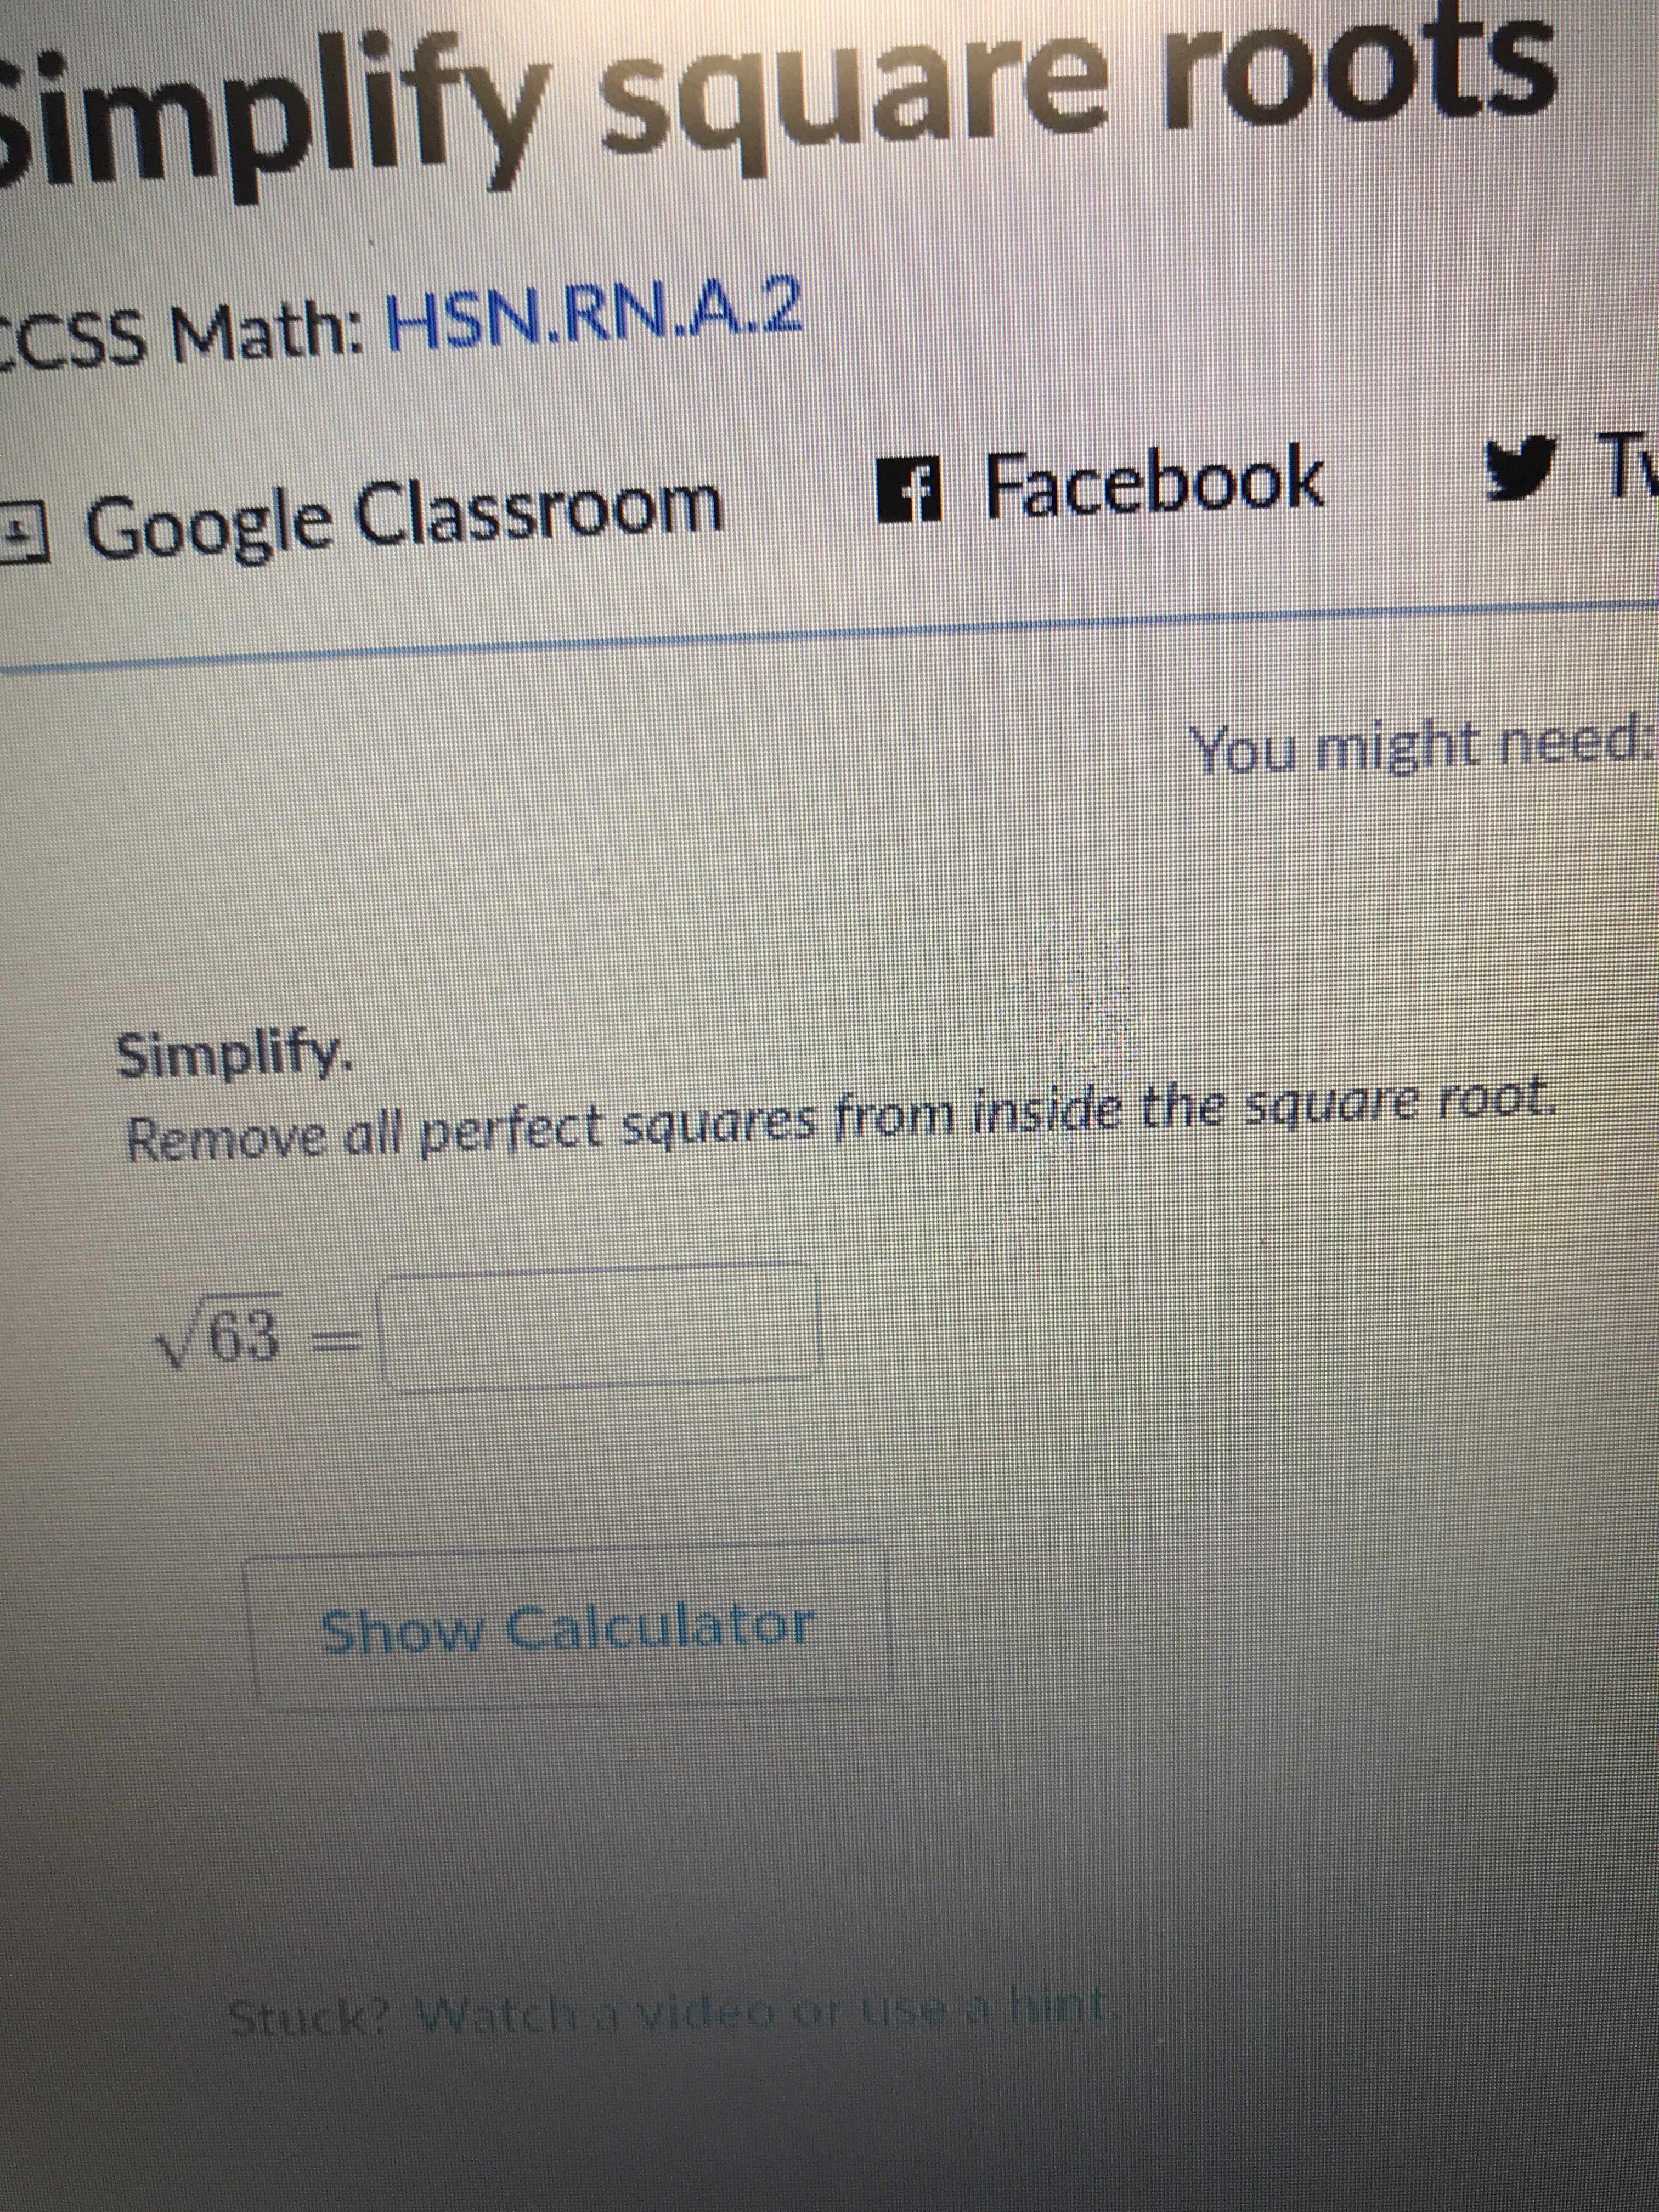 Simplify square roots
CSS Math: HSN.RN.A.2
Tu
f Facebook
Google Classroom
You might need:
Simplify.
Remove all perfect squares from inside the square root
63
Shov Calculator
Stuck? Watch a video or tse a hint
